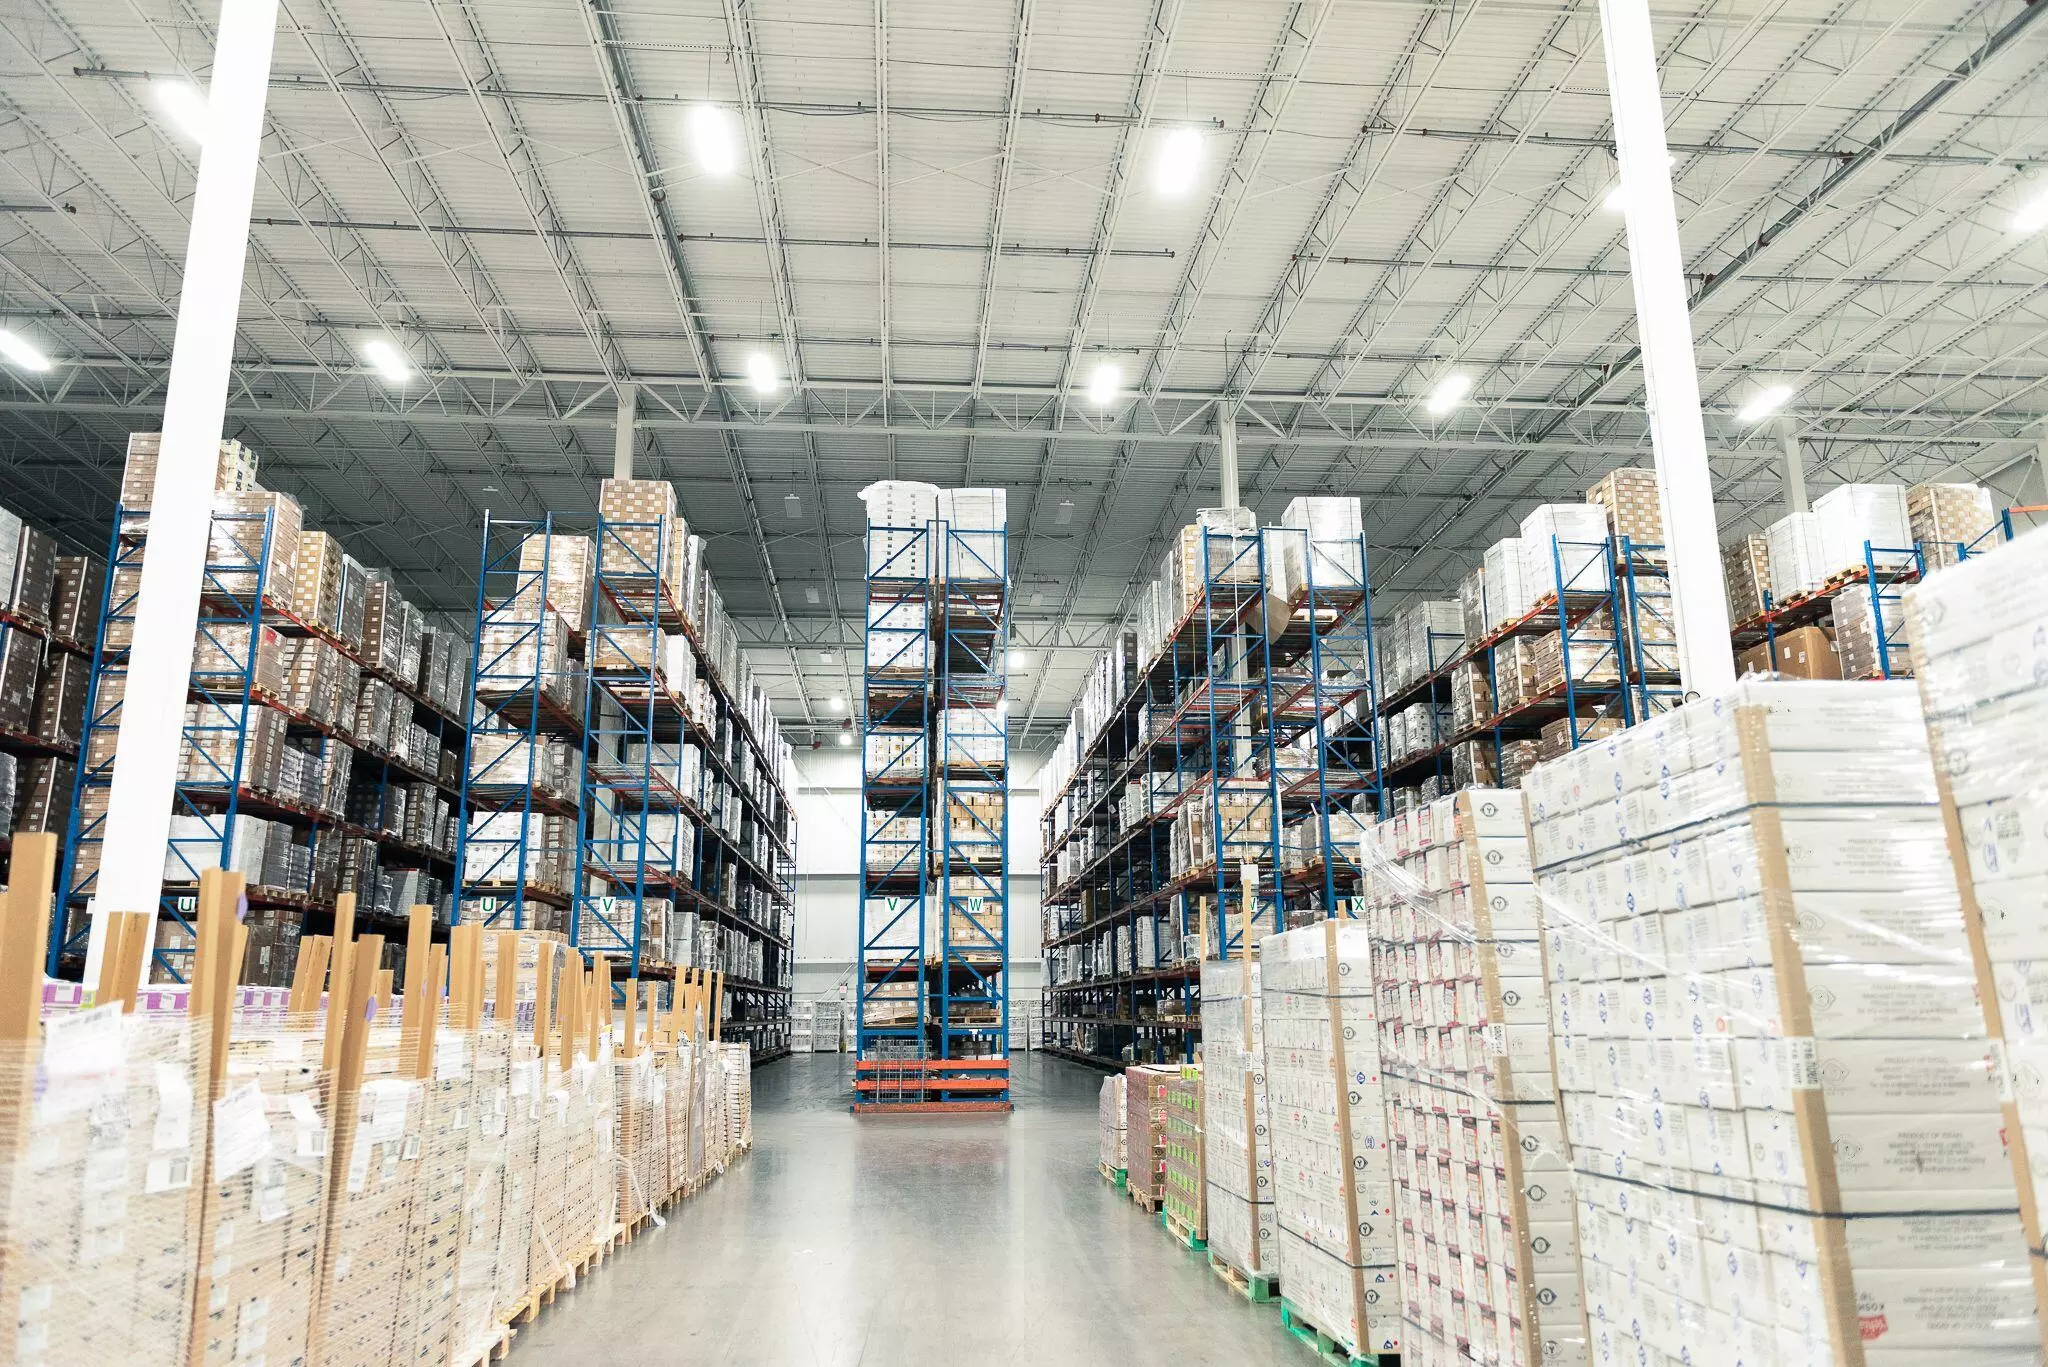 In E-Commerce push, Seafrigo Group opens fifth warehouse in New Jersey